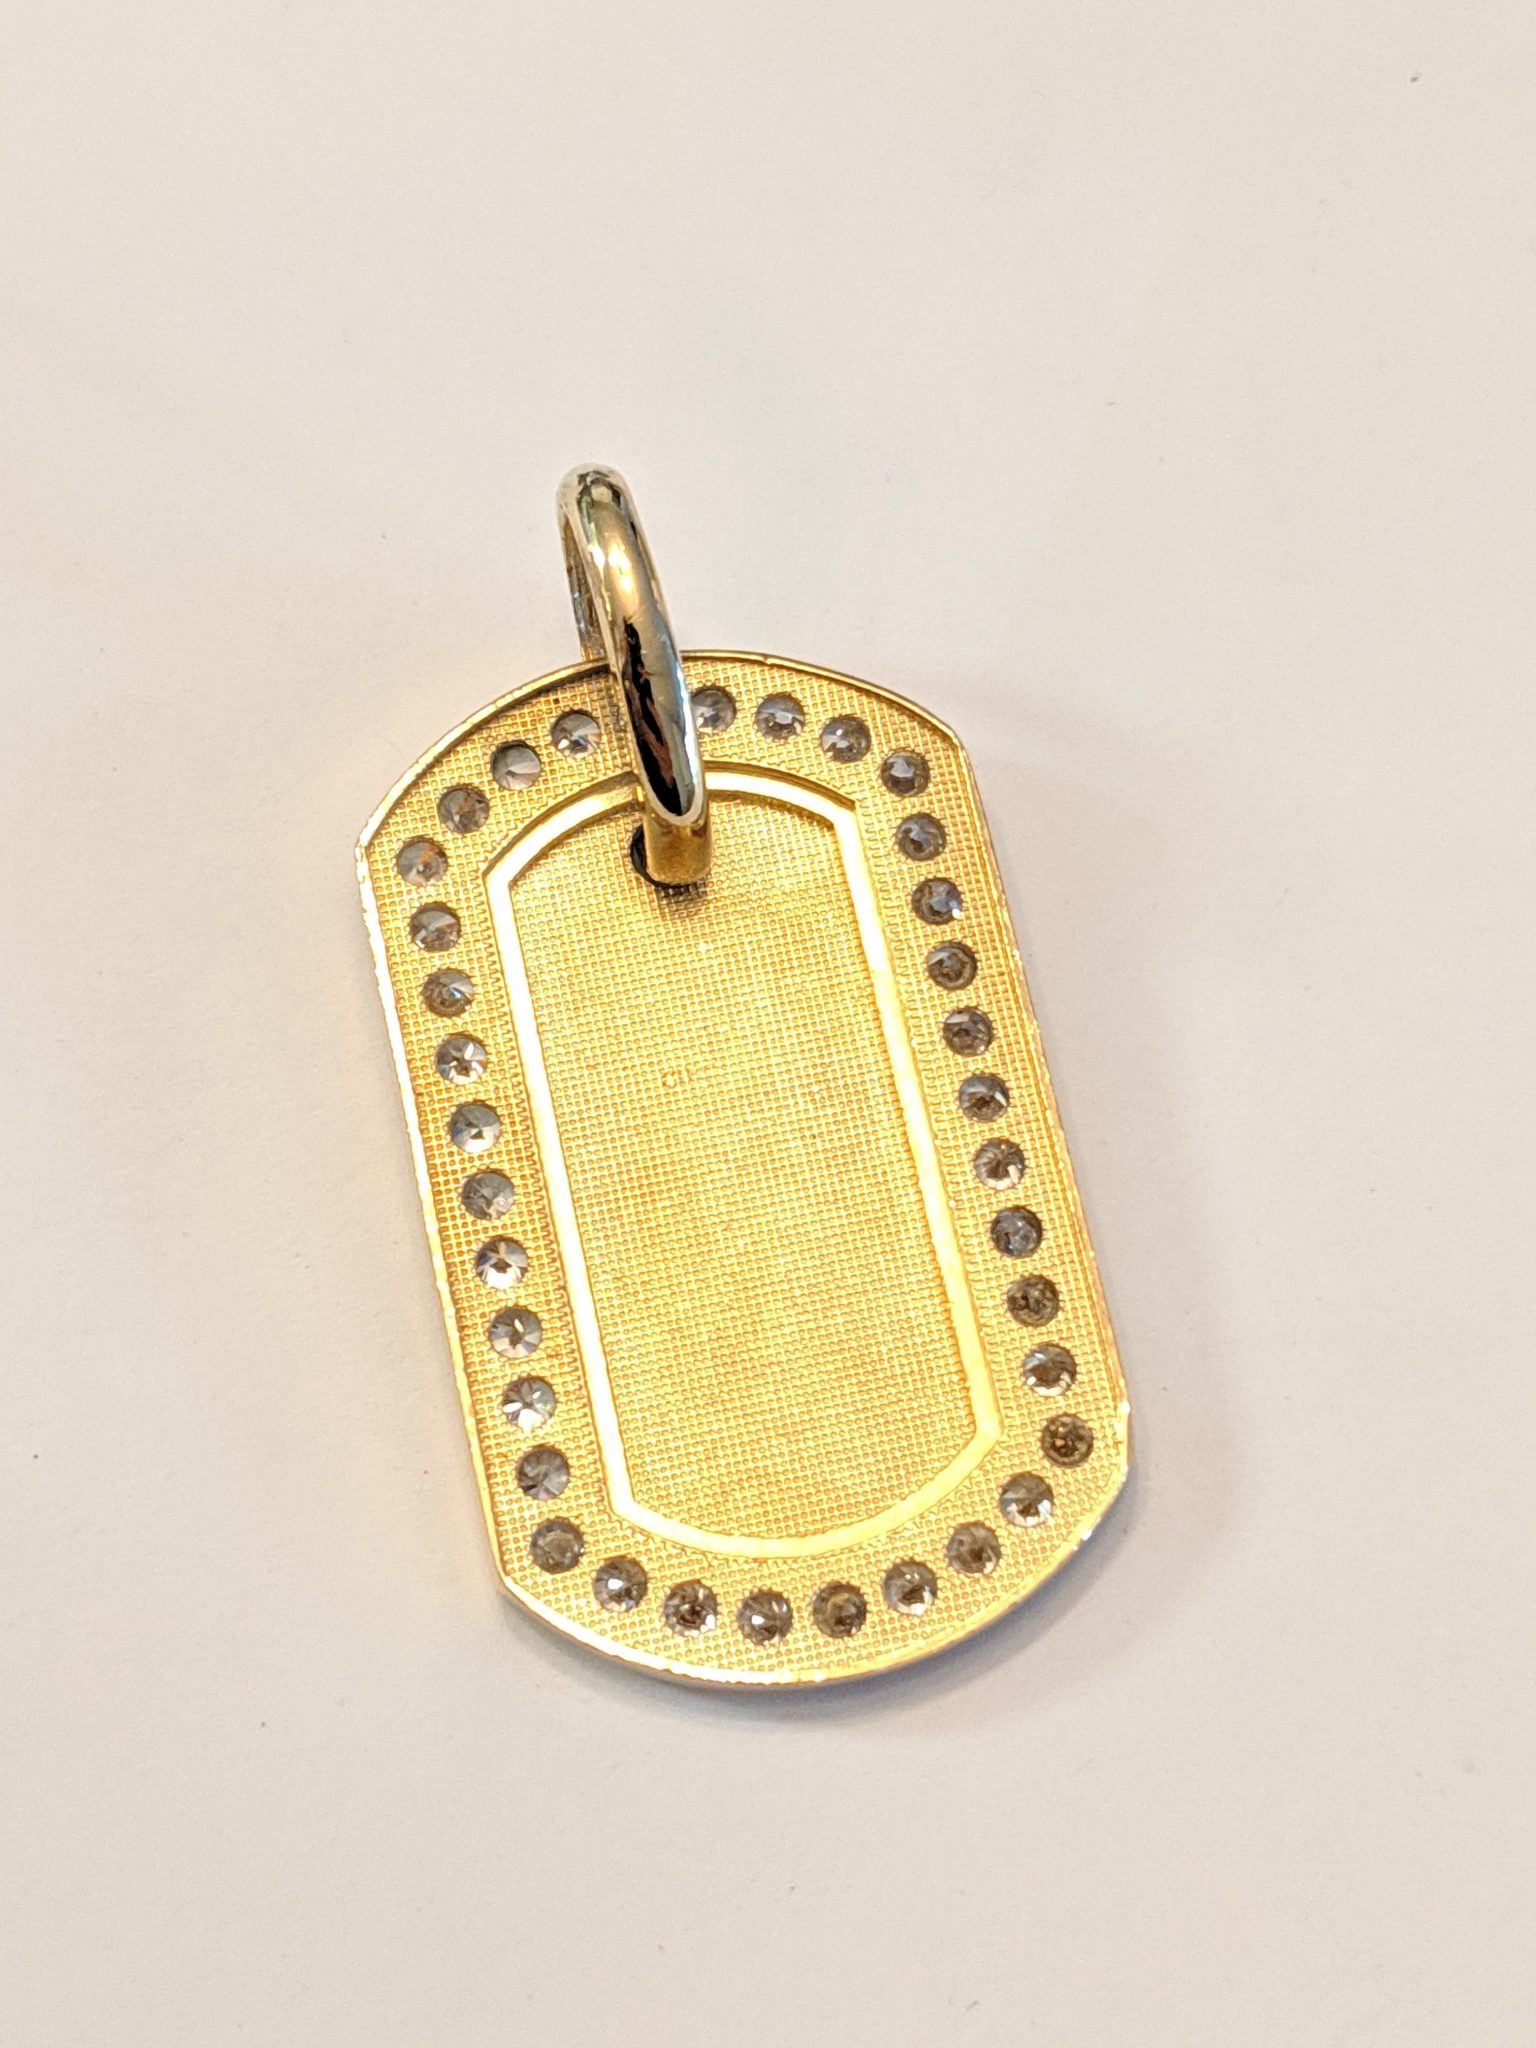 14K Yellow Gold Dog Tag Photo Pendant with Cubic Zirconias Custom Design Rear View